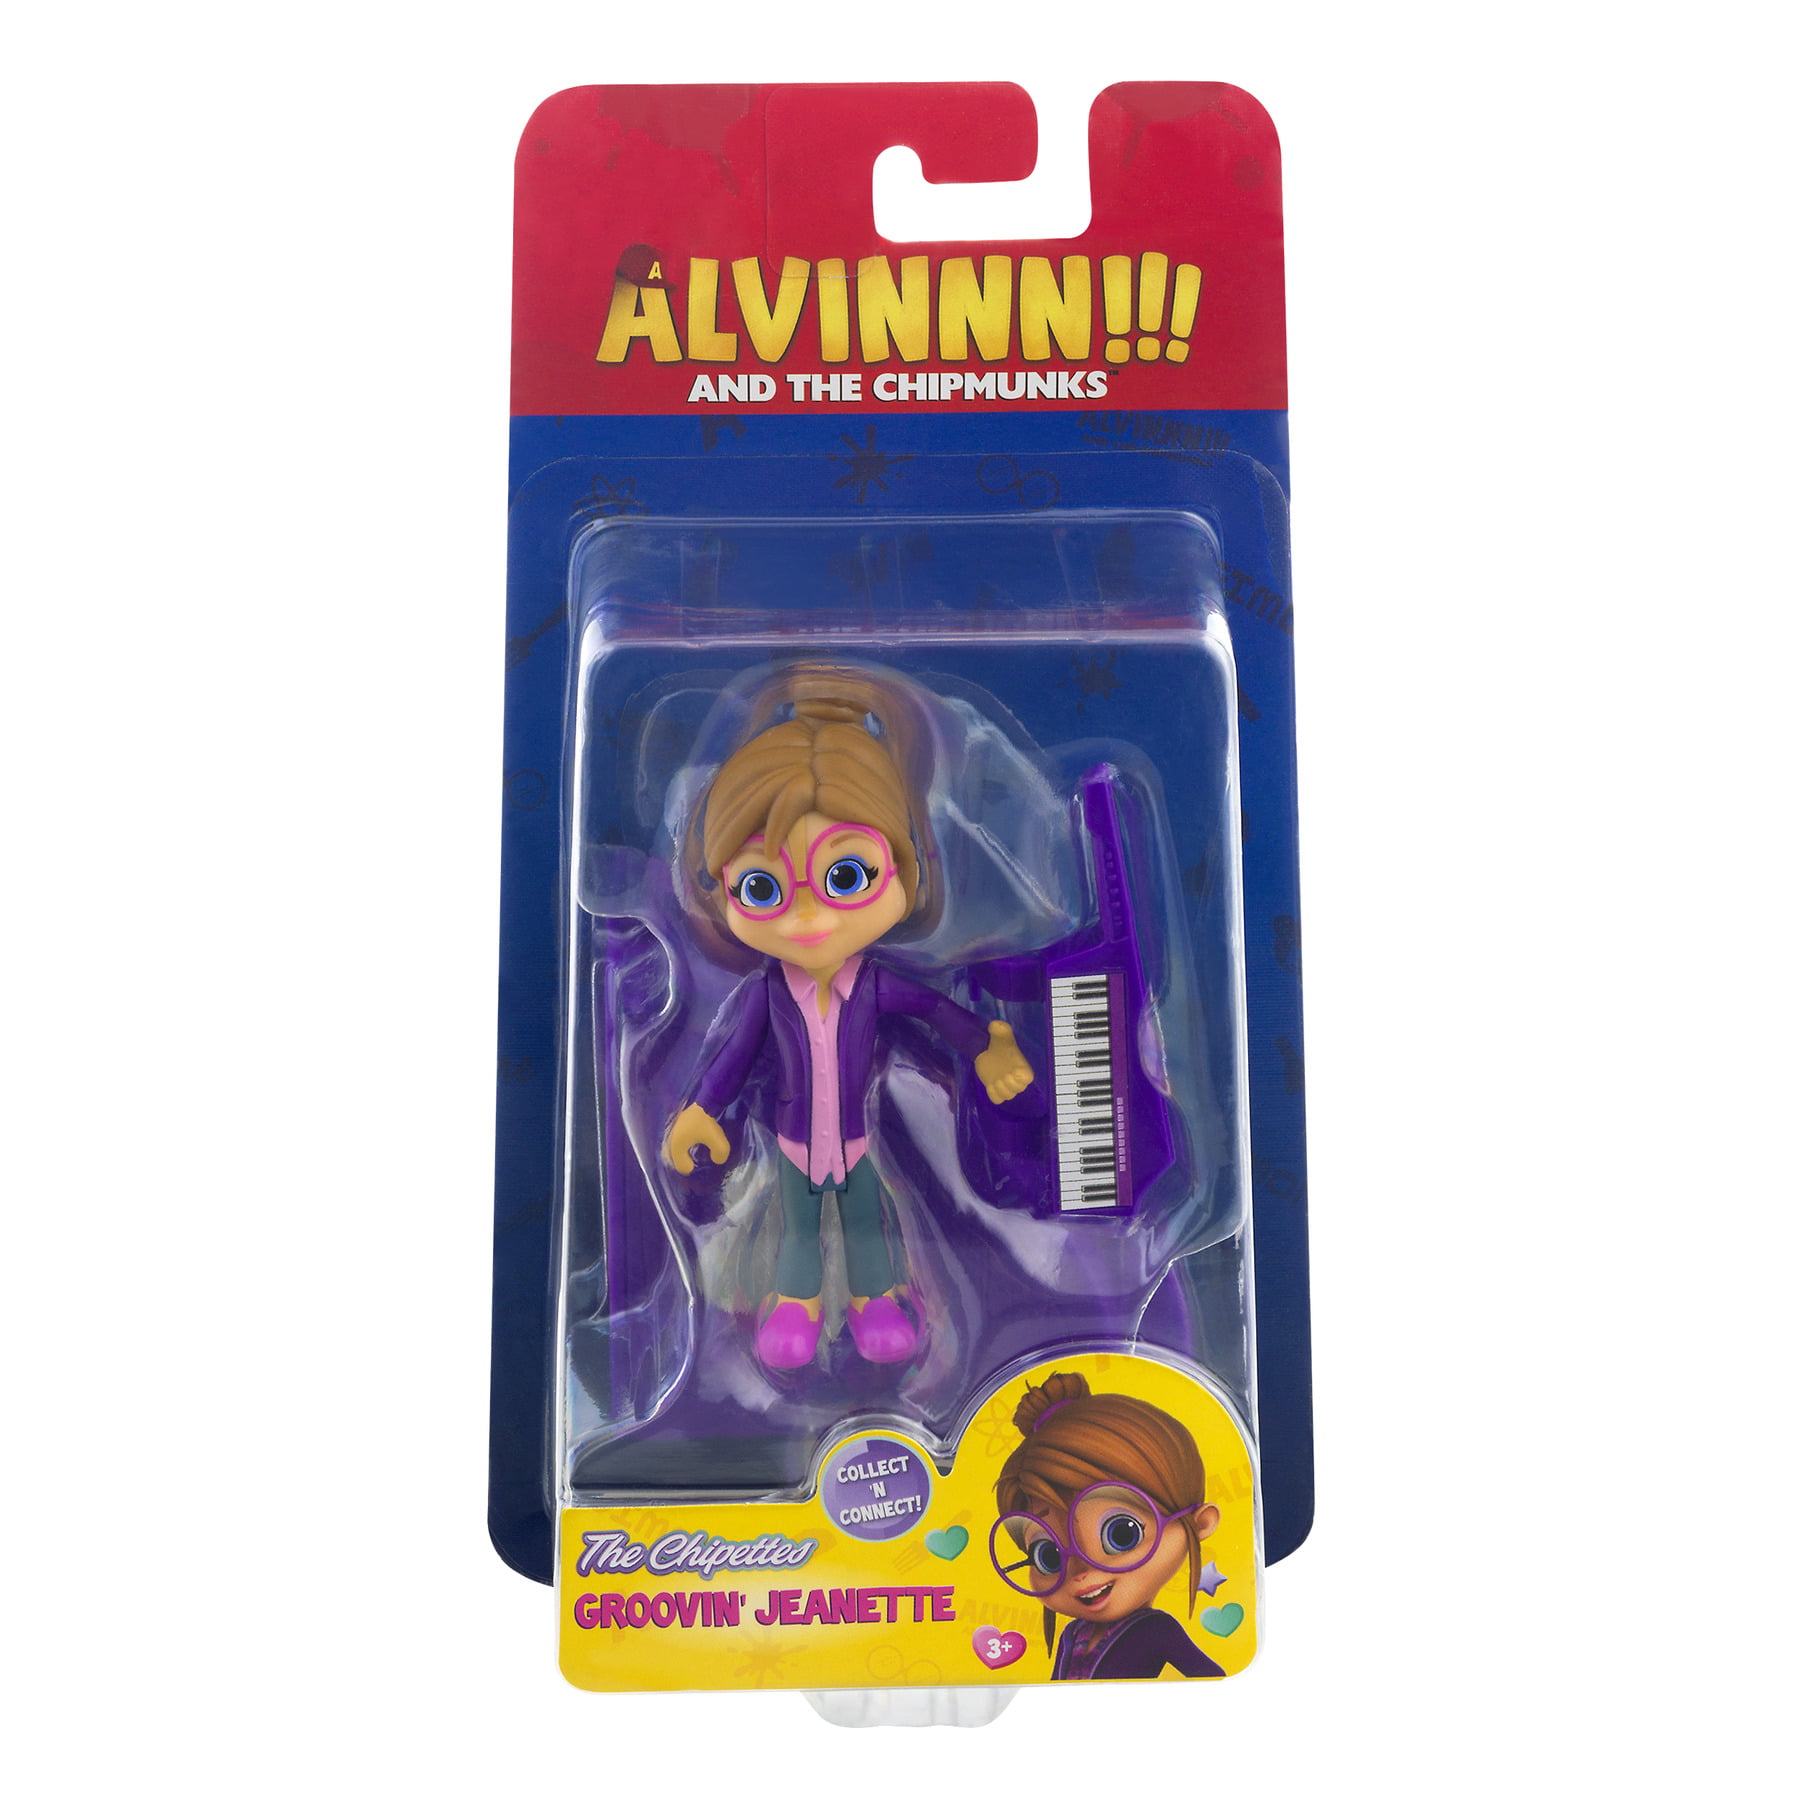 alvin and the chipmunks collectible figures